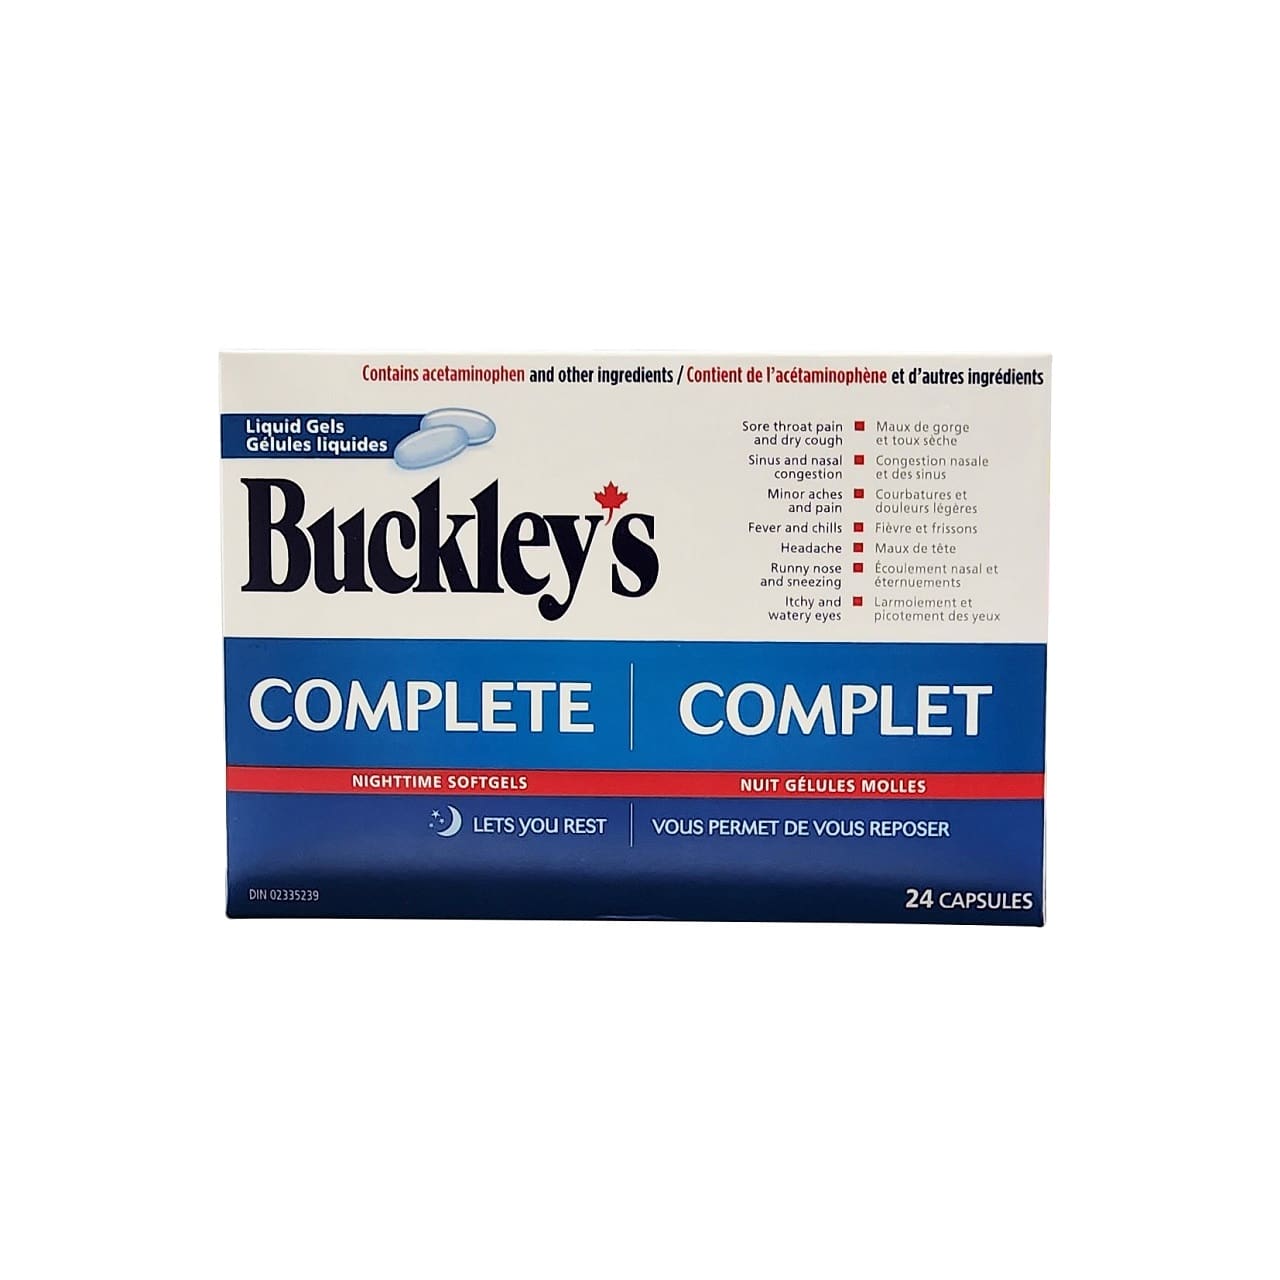 Product label for Buckley's Complete Nighttime Softgels (24 capsules)